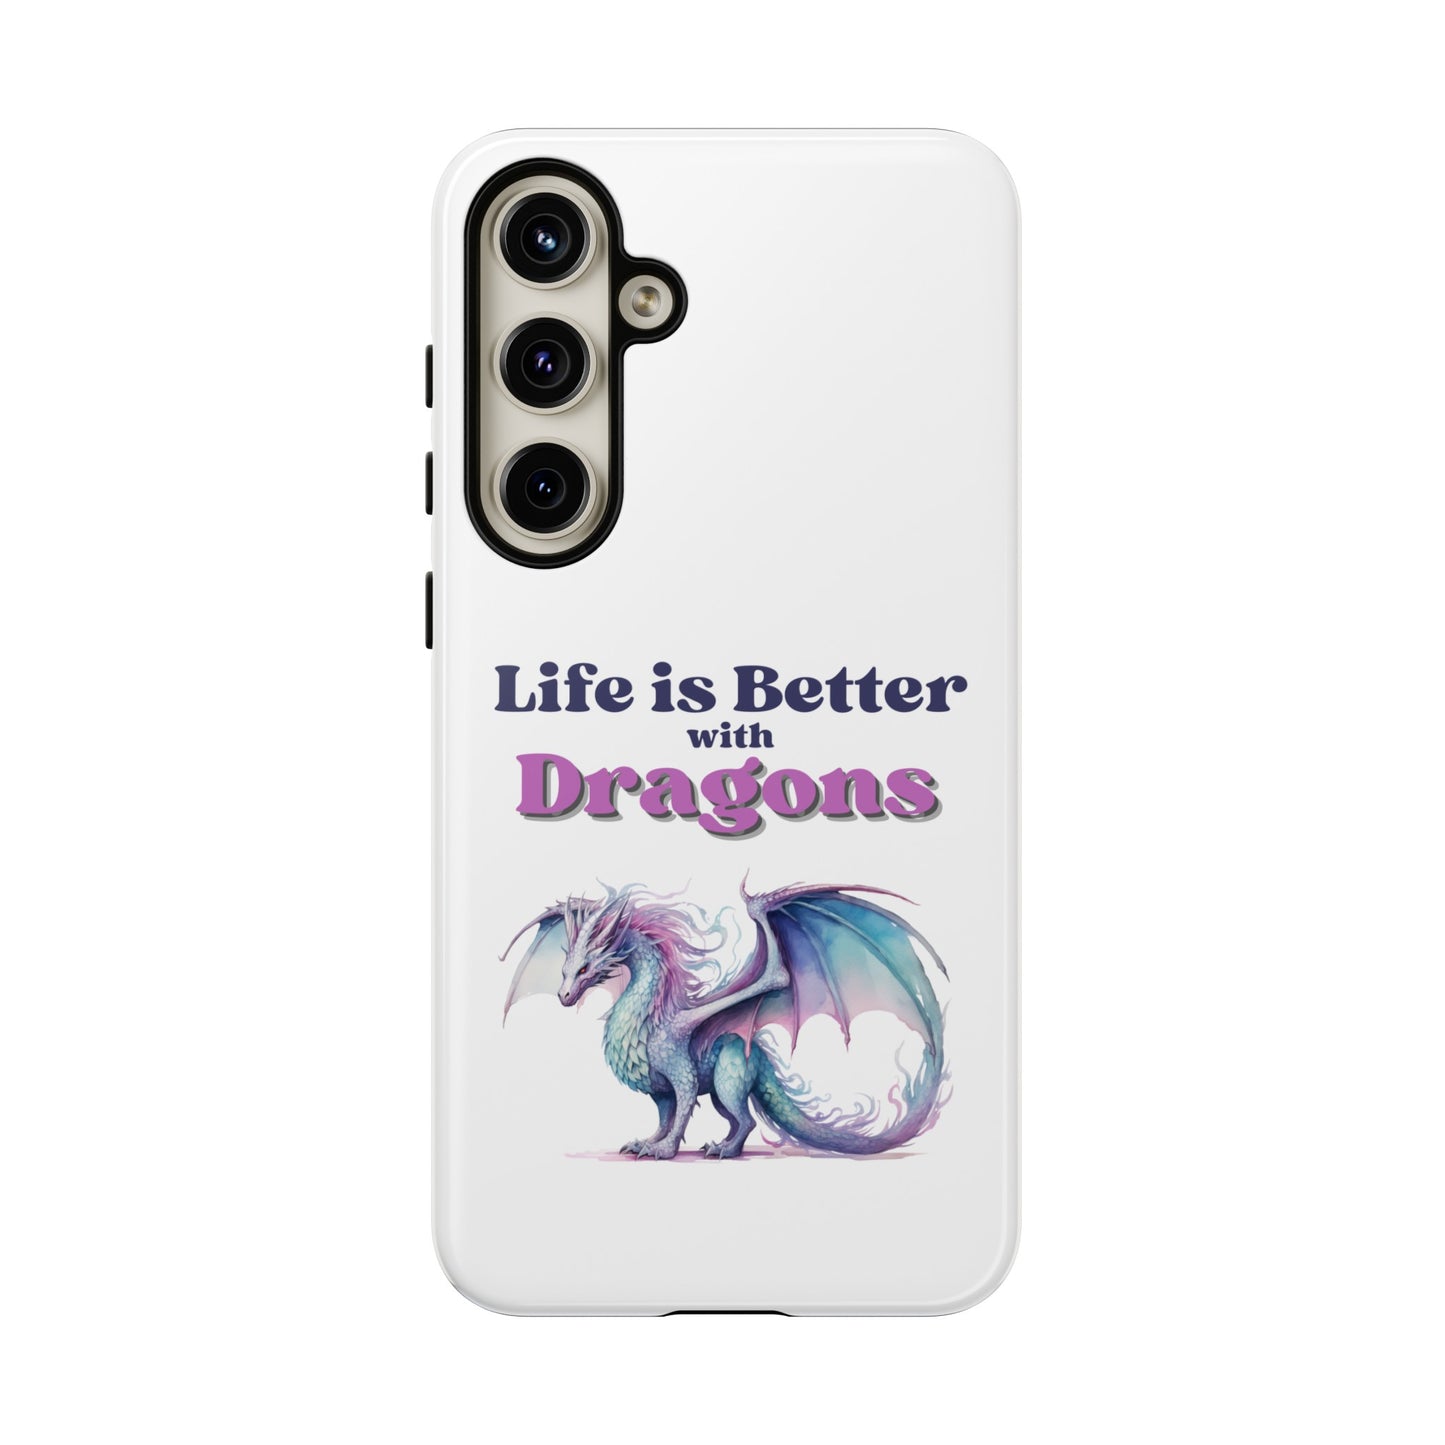 Life is Better with Dragons, Tough Cases